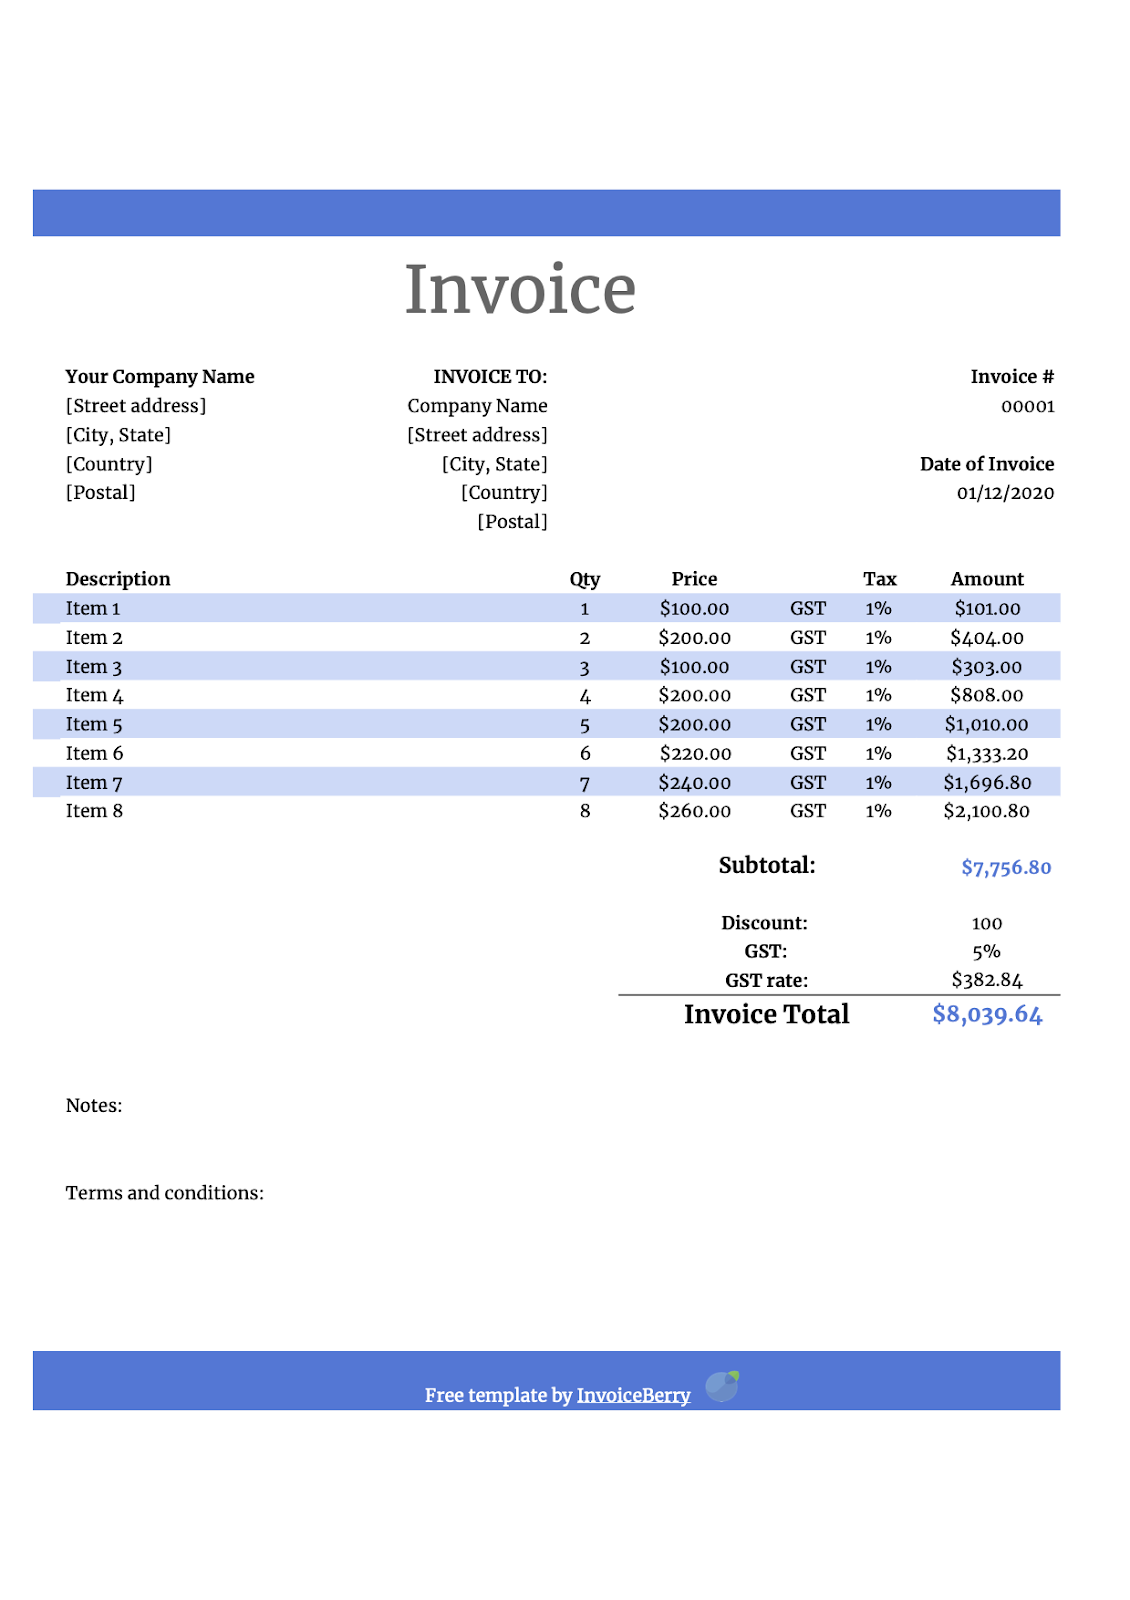 Example of what to include in an invoice. 